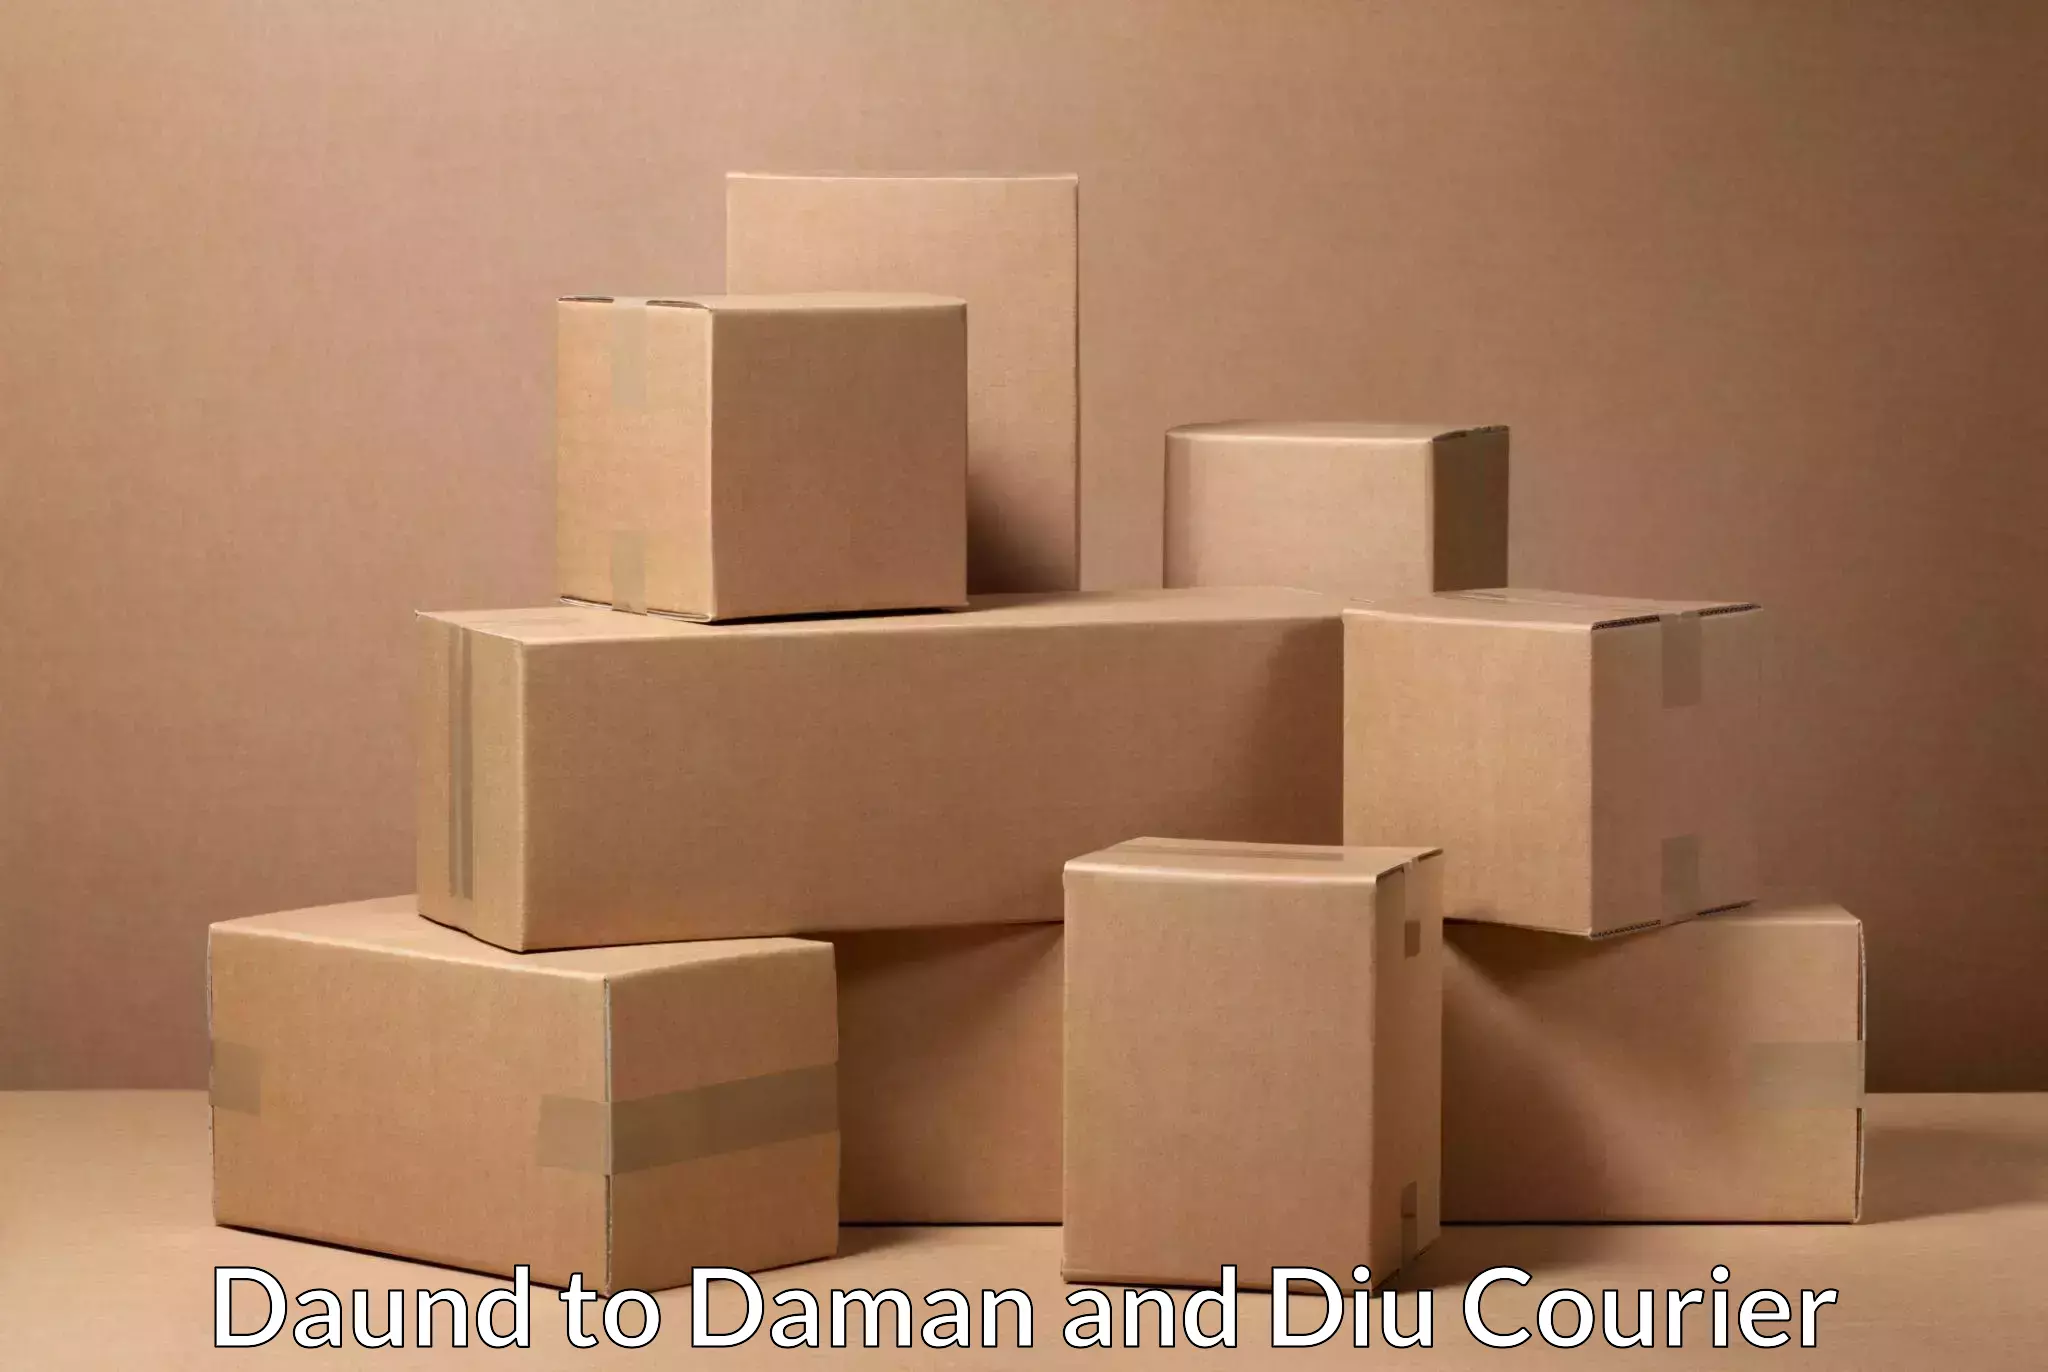 Fast-track shipping solutions Daund to Daman and Diu